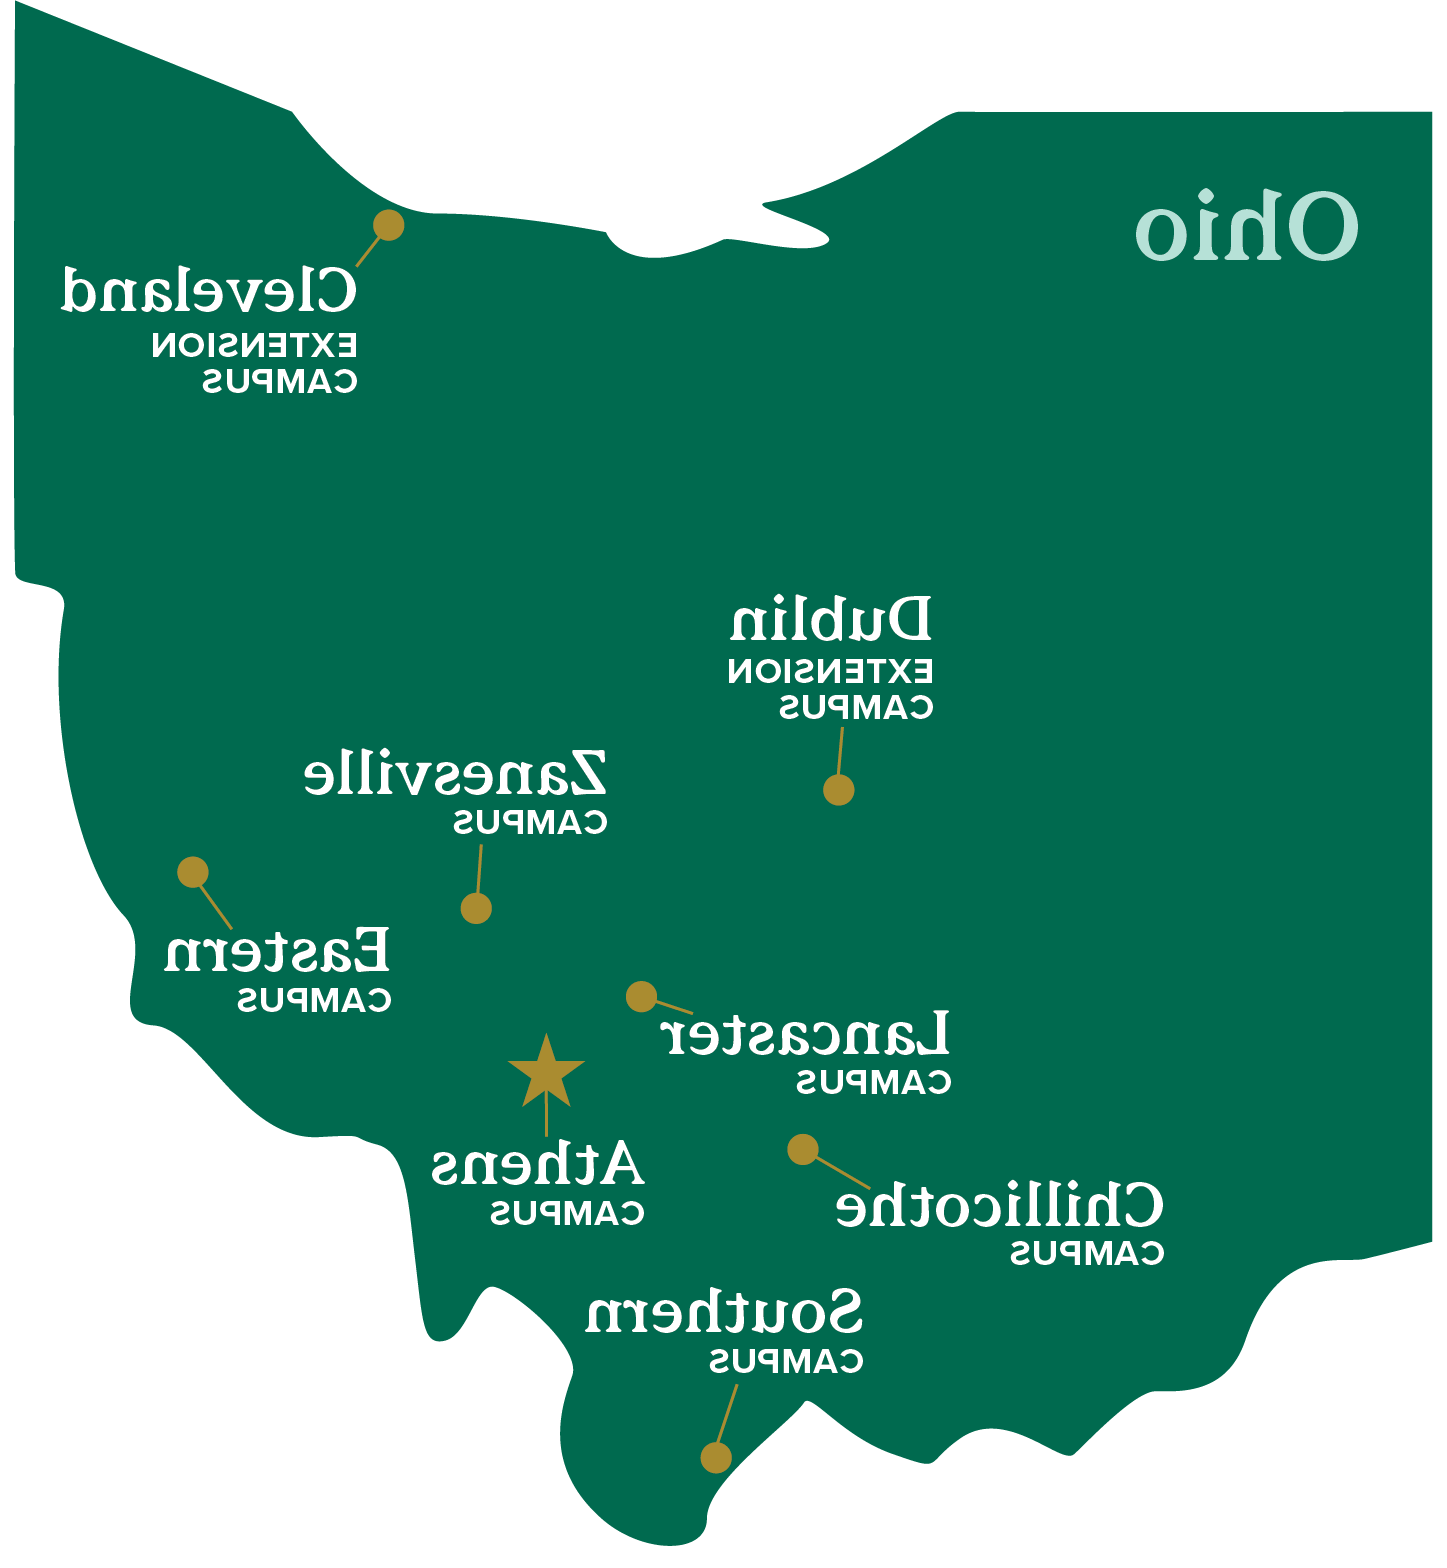 map of the state of Ohio with indicators for each Ohio University campus